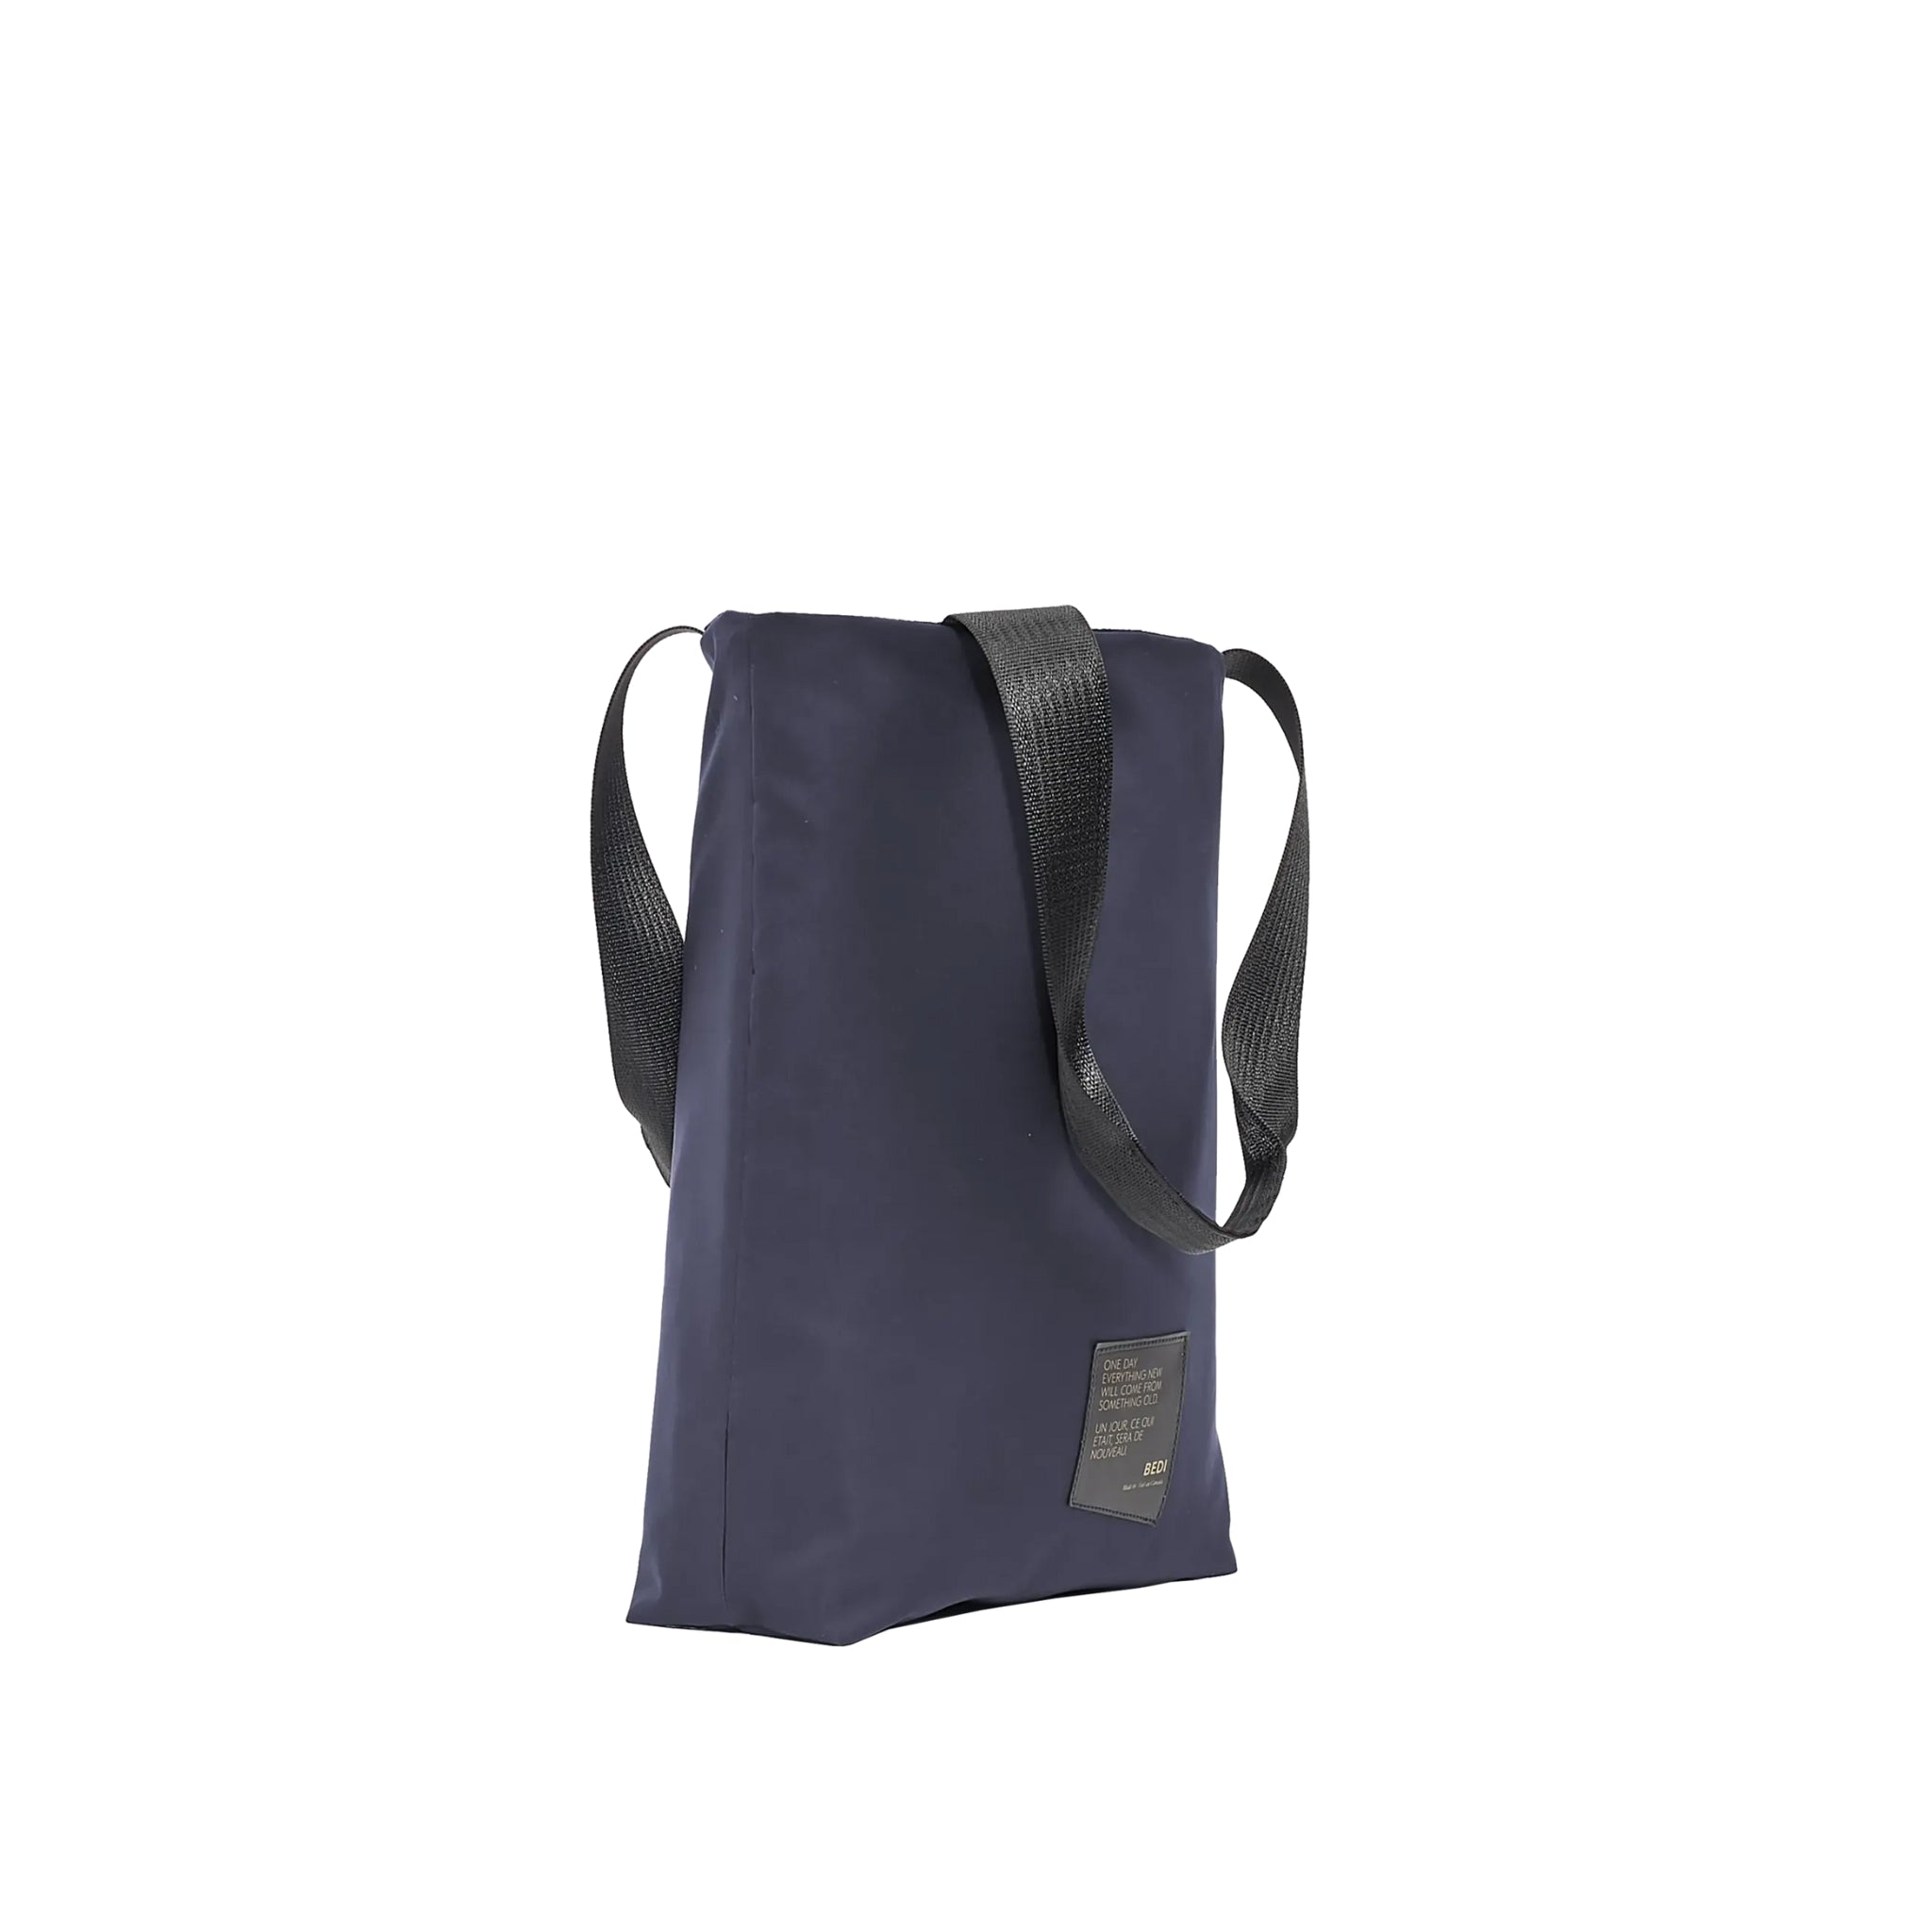 side profile of utilitarian style medium tote bag in deastock navy nylon, on a white background.